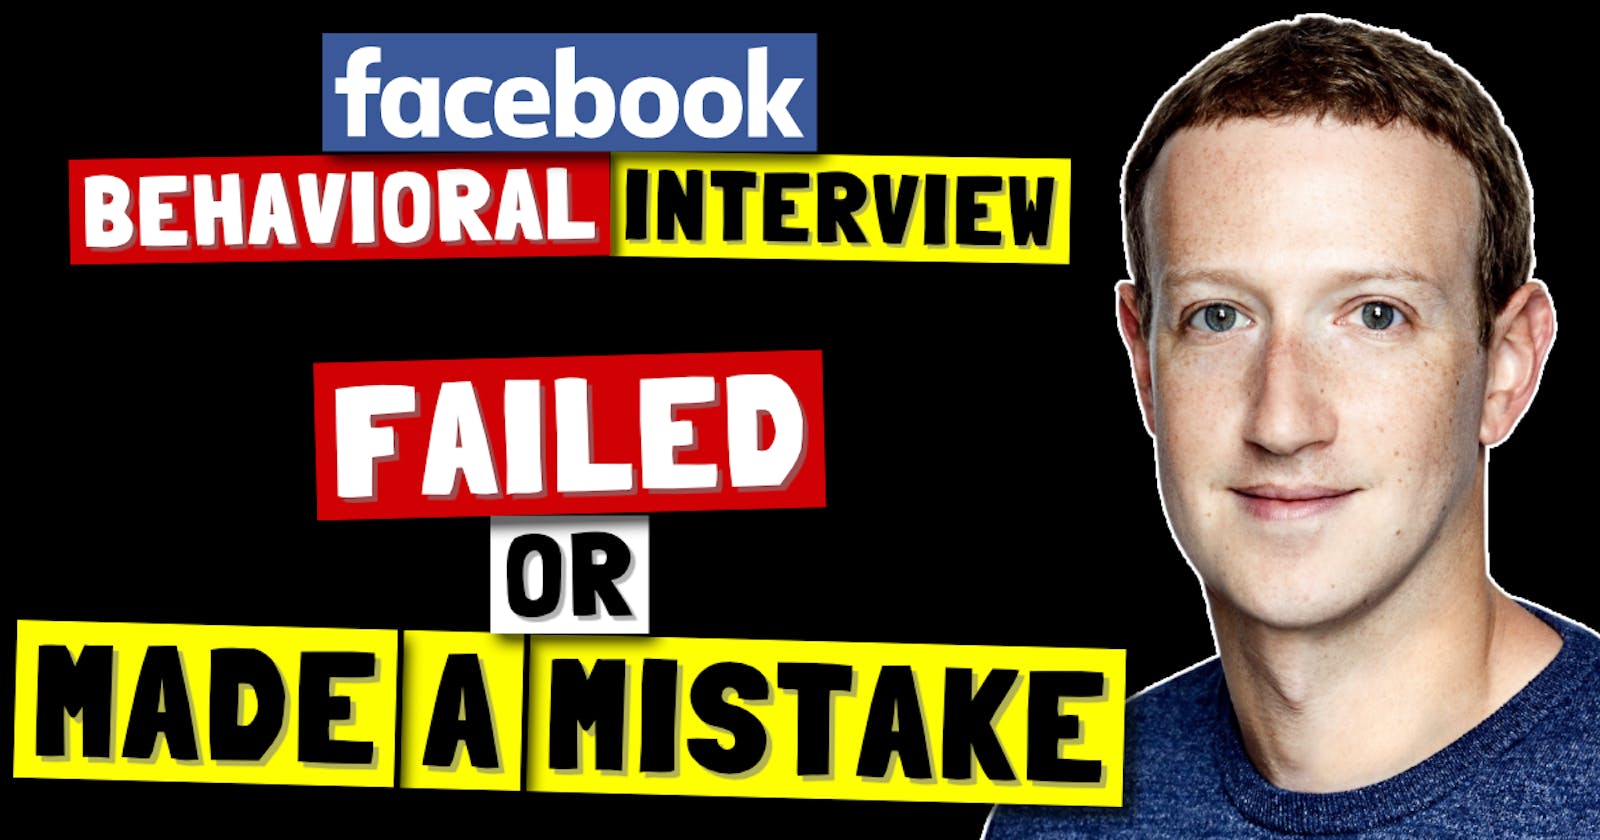 ✅ Tell Me About A Time You Failed Or Made A Mistake | Facebook Behavioral (Jedi) Interview Series 🔥